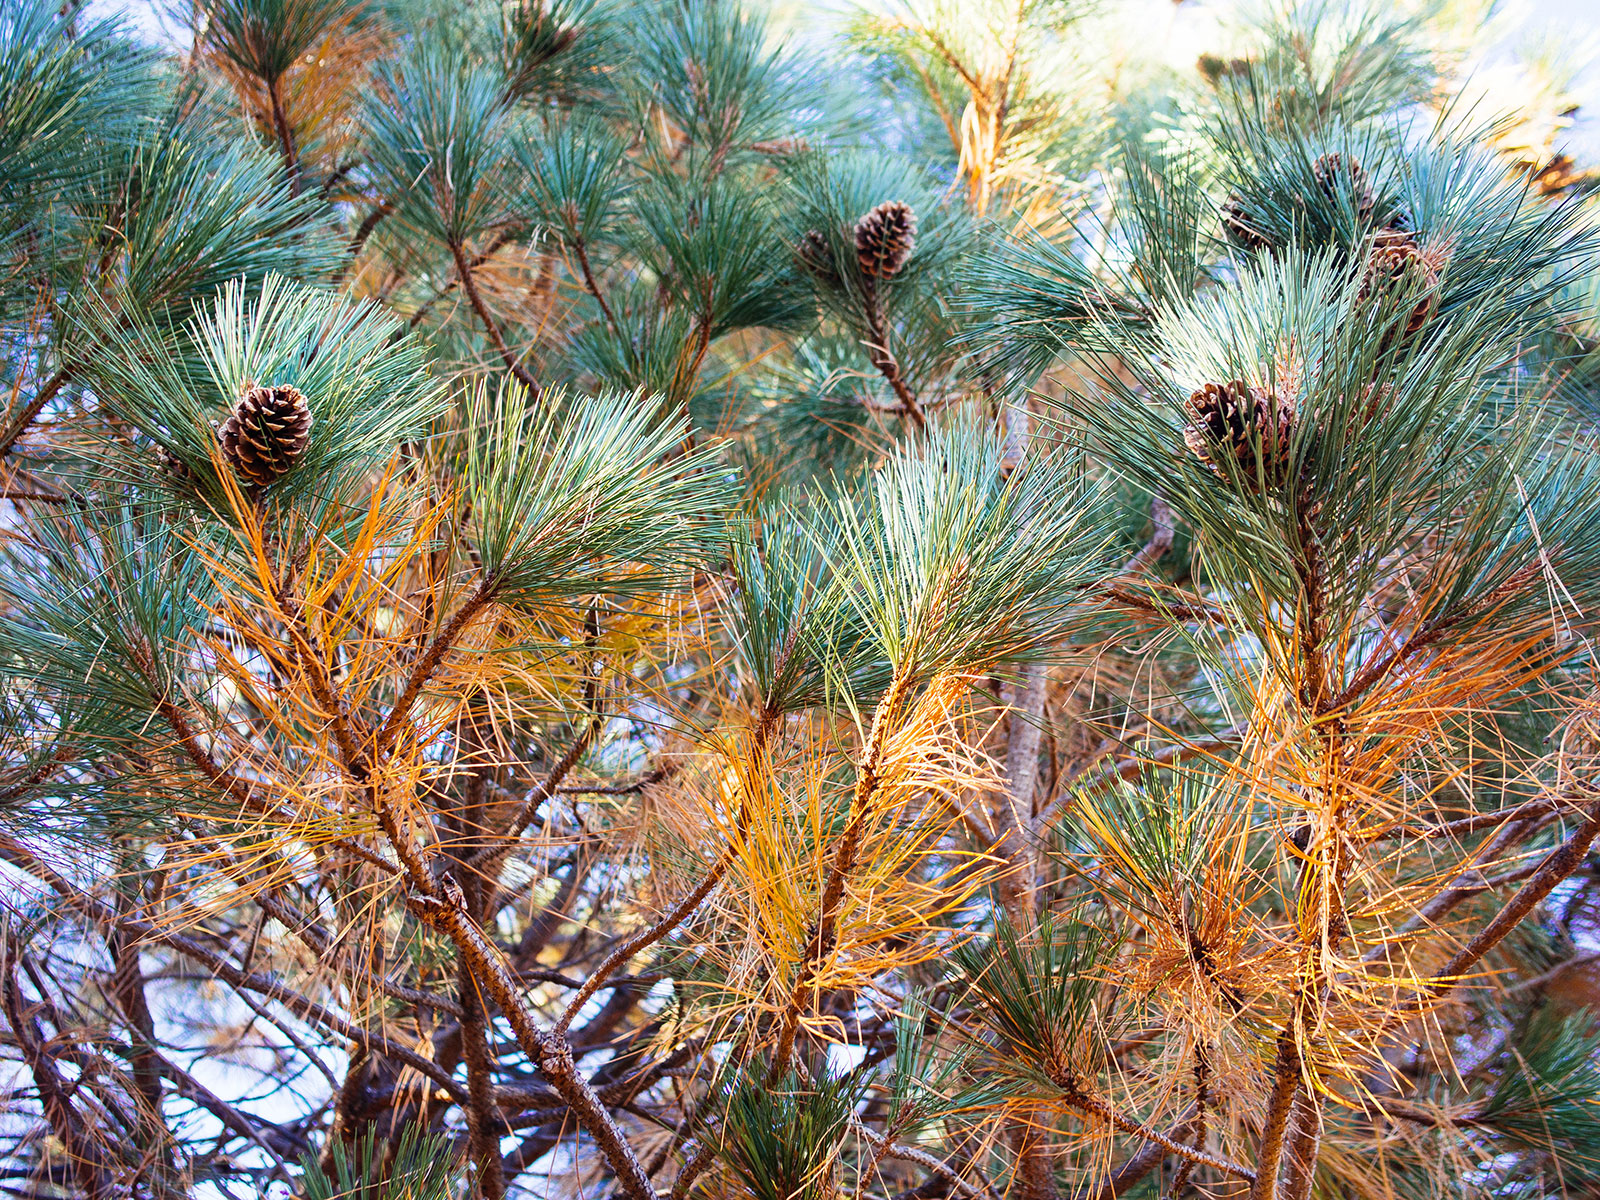 Scotch pine tree with brown interior needles about to drop in fall